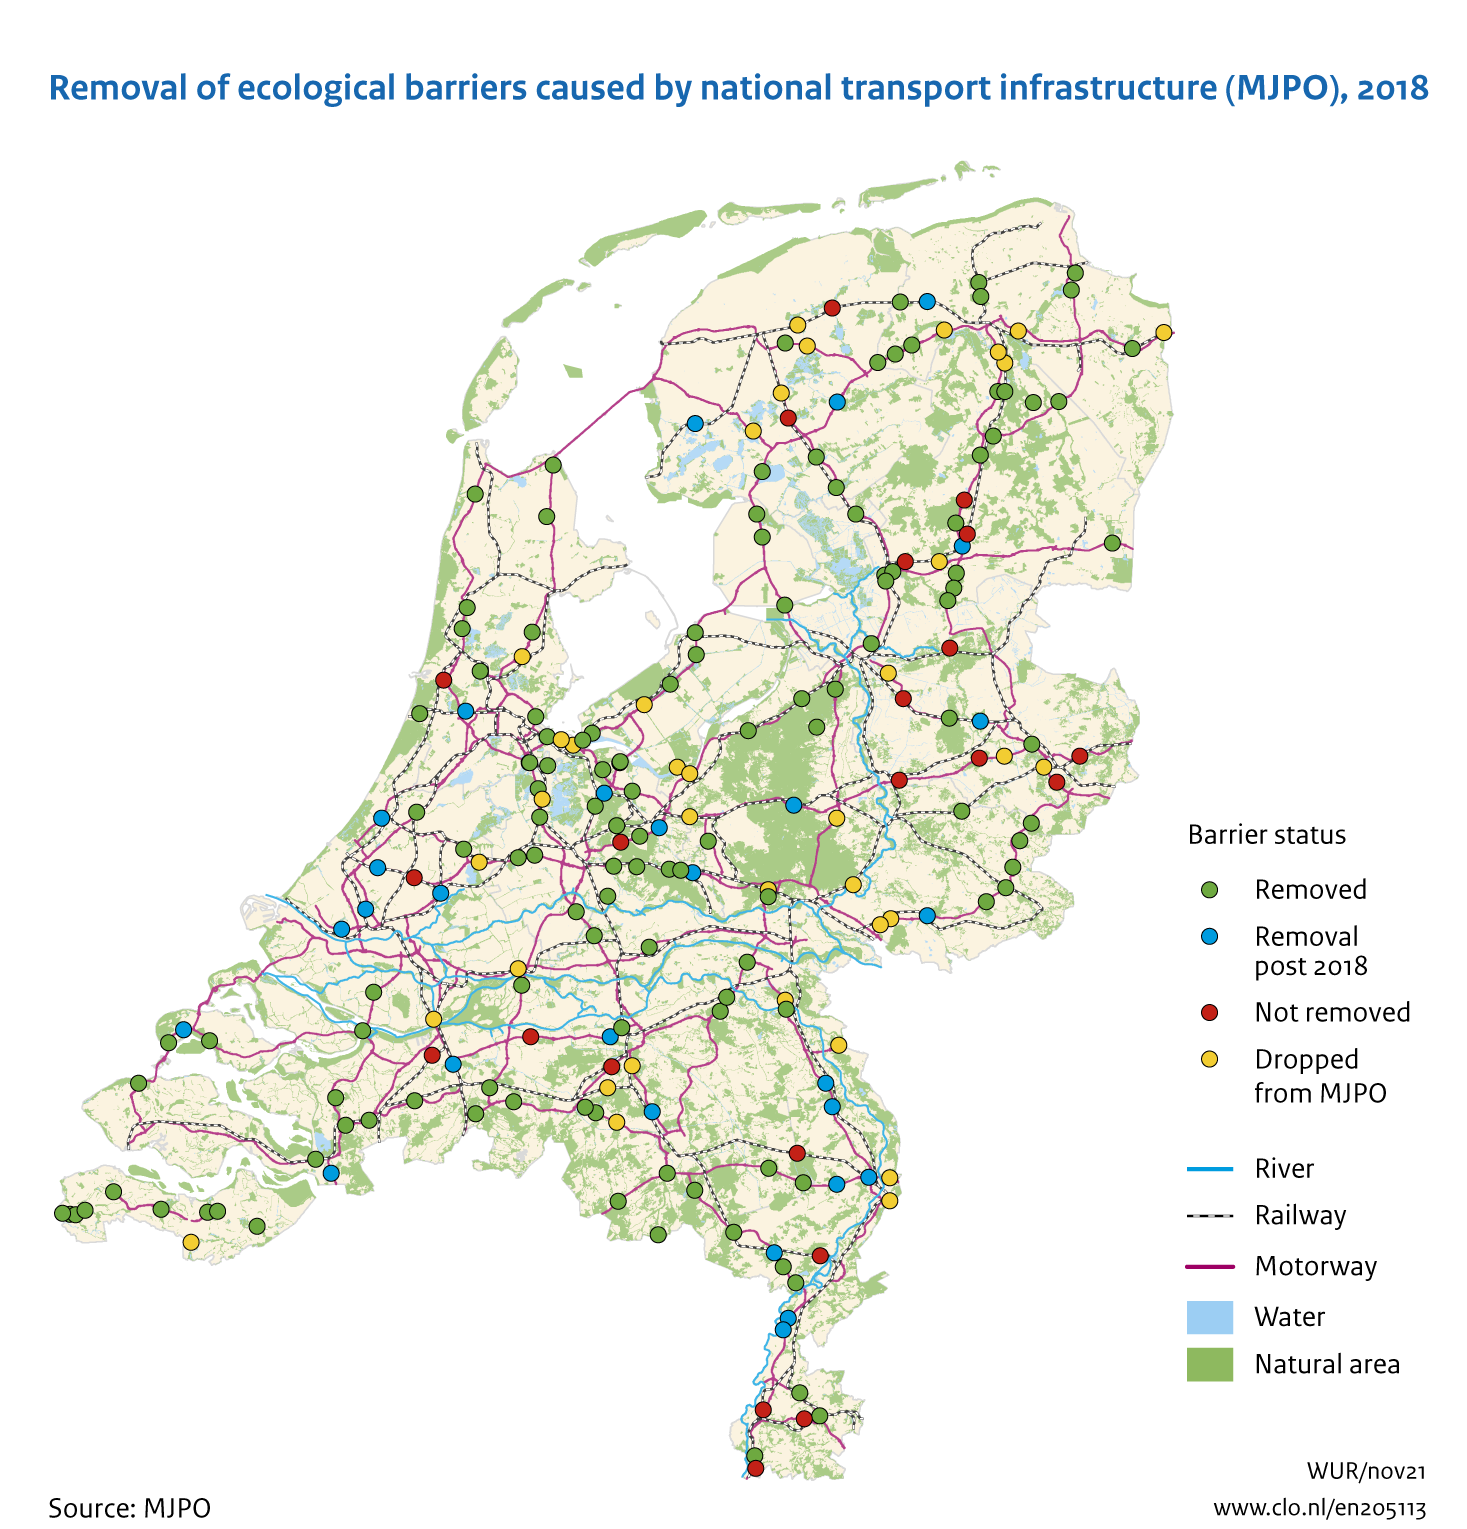 Image Removal of ecological barriers caused by national transport infrastructure (MJPO), 2018. The image is further explained in the text.